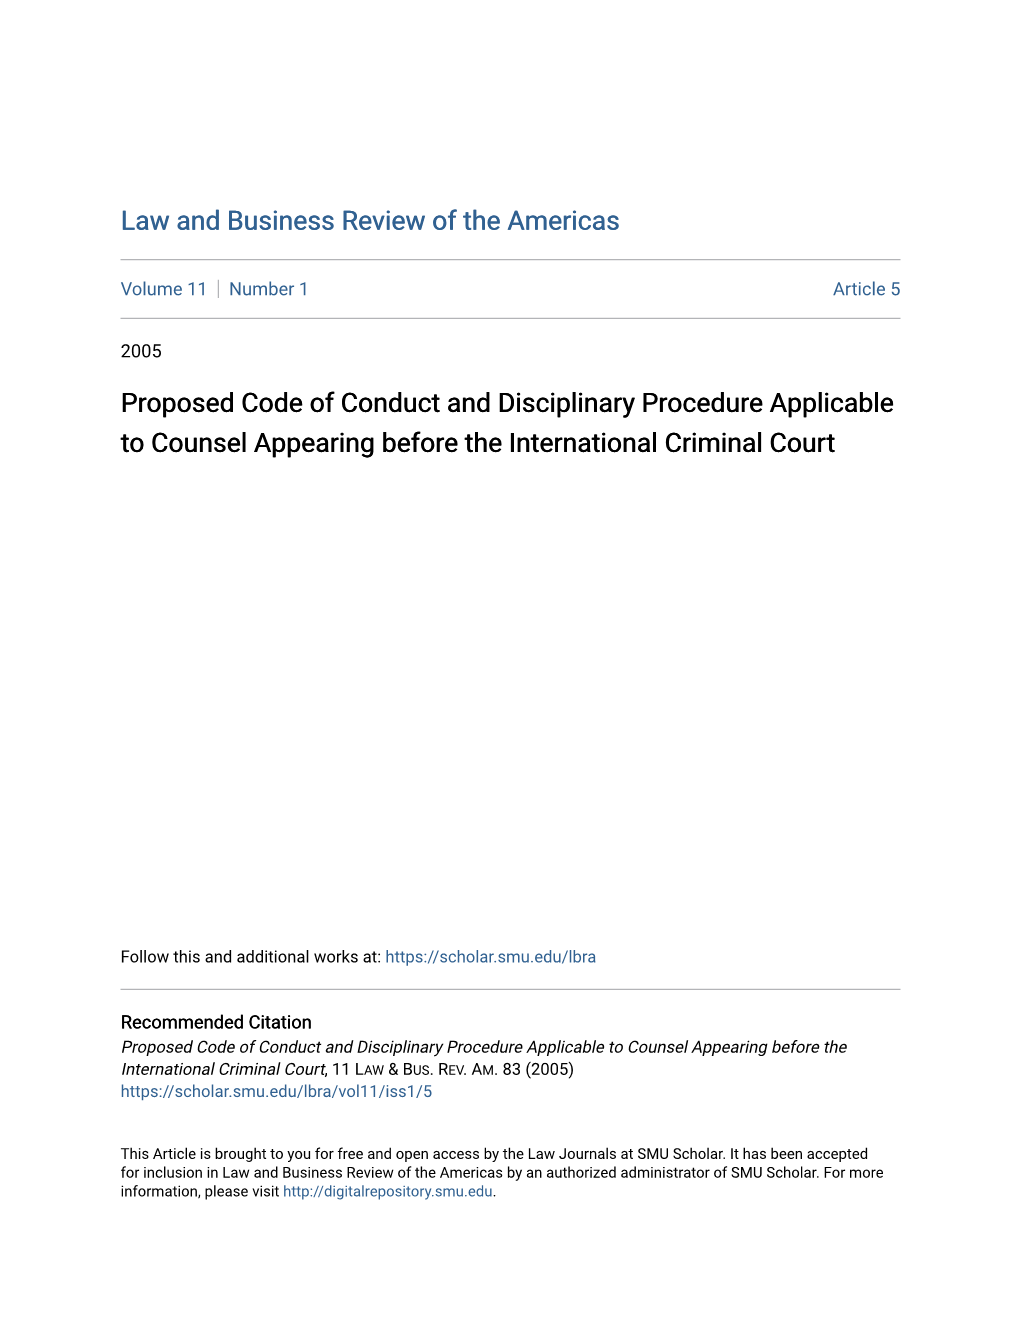 Proposed Code of Conduct and Disciplinary Procedure Applicable to Counsel Appearing Before the International Criminal Court